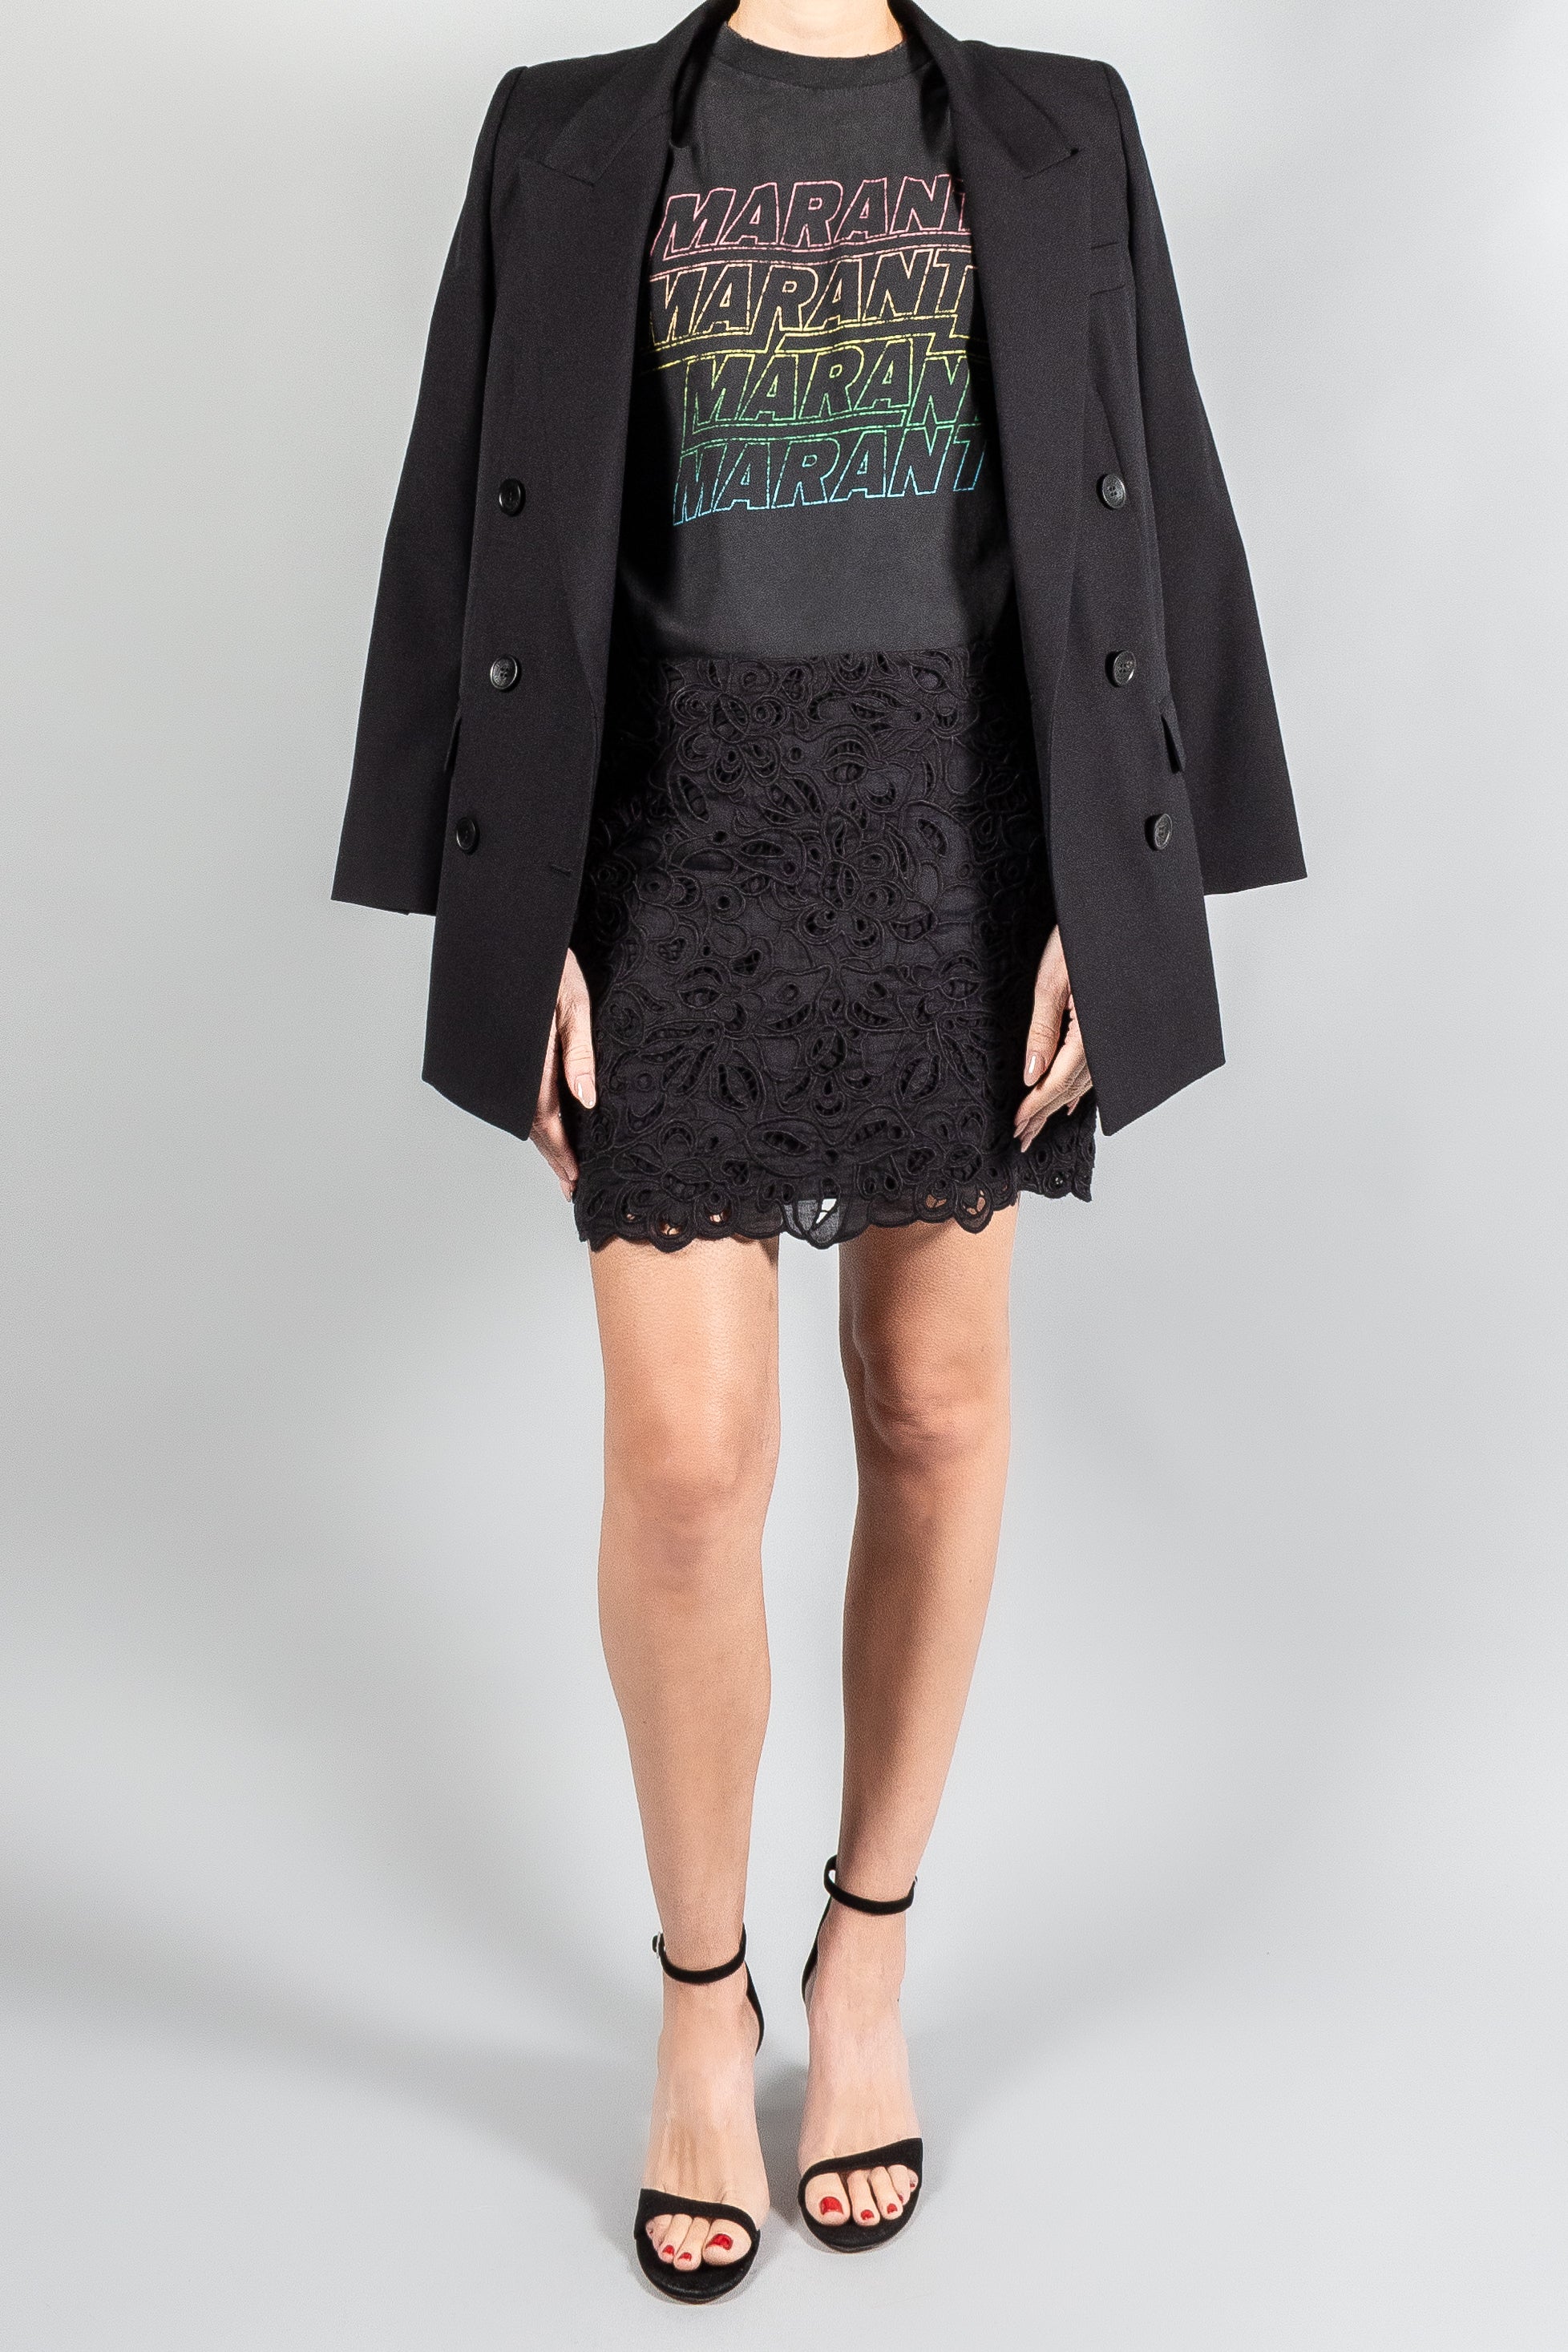 Isabel Marant Dina Mini Skirt-Skirts-Misch-Boutique-Vancouver-Canada-misch.ca